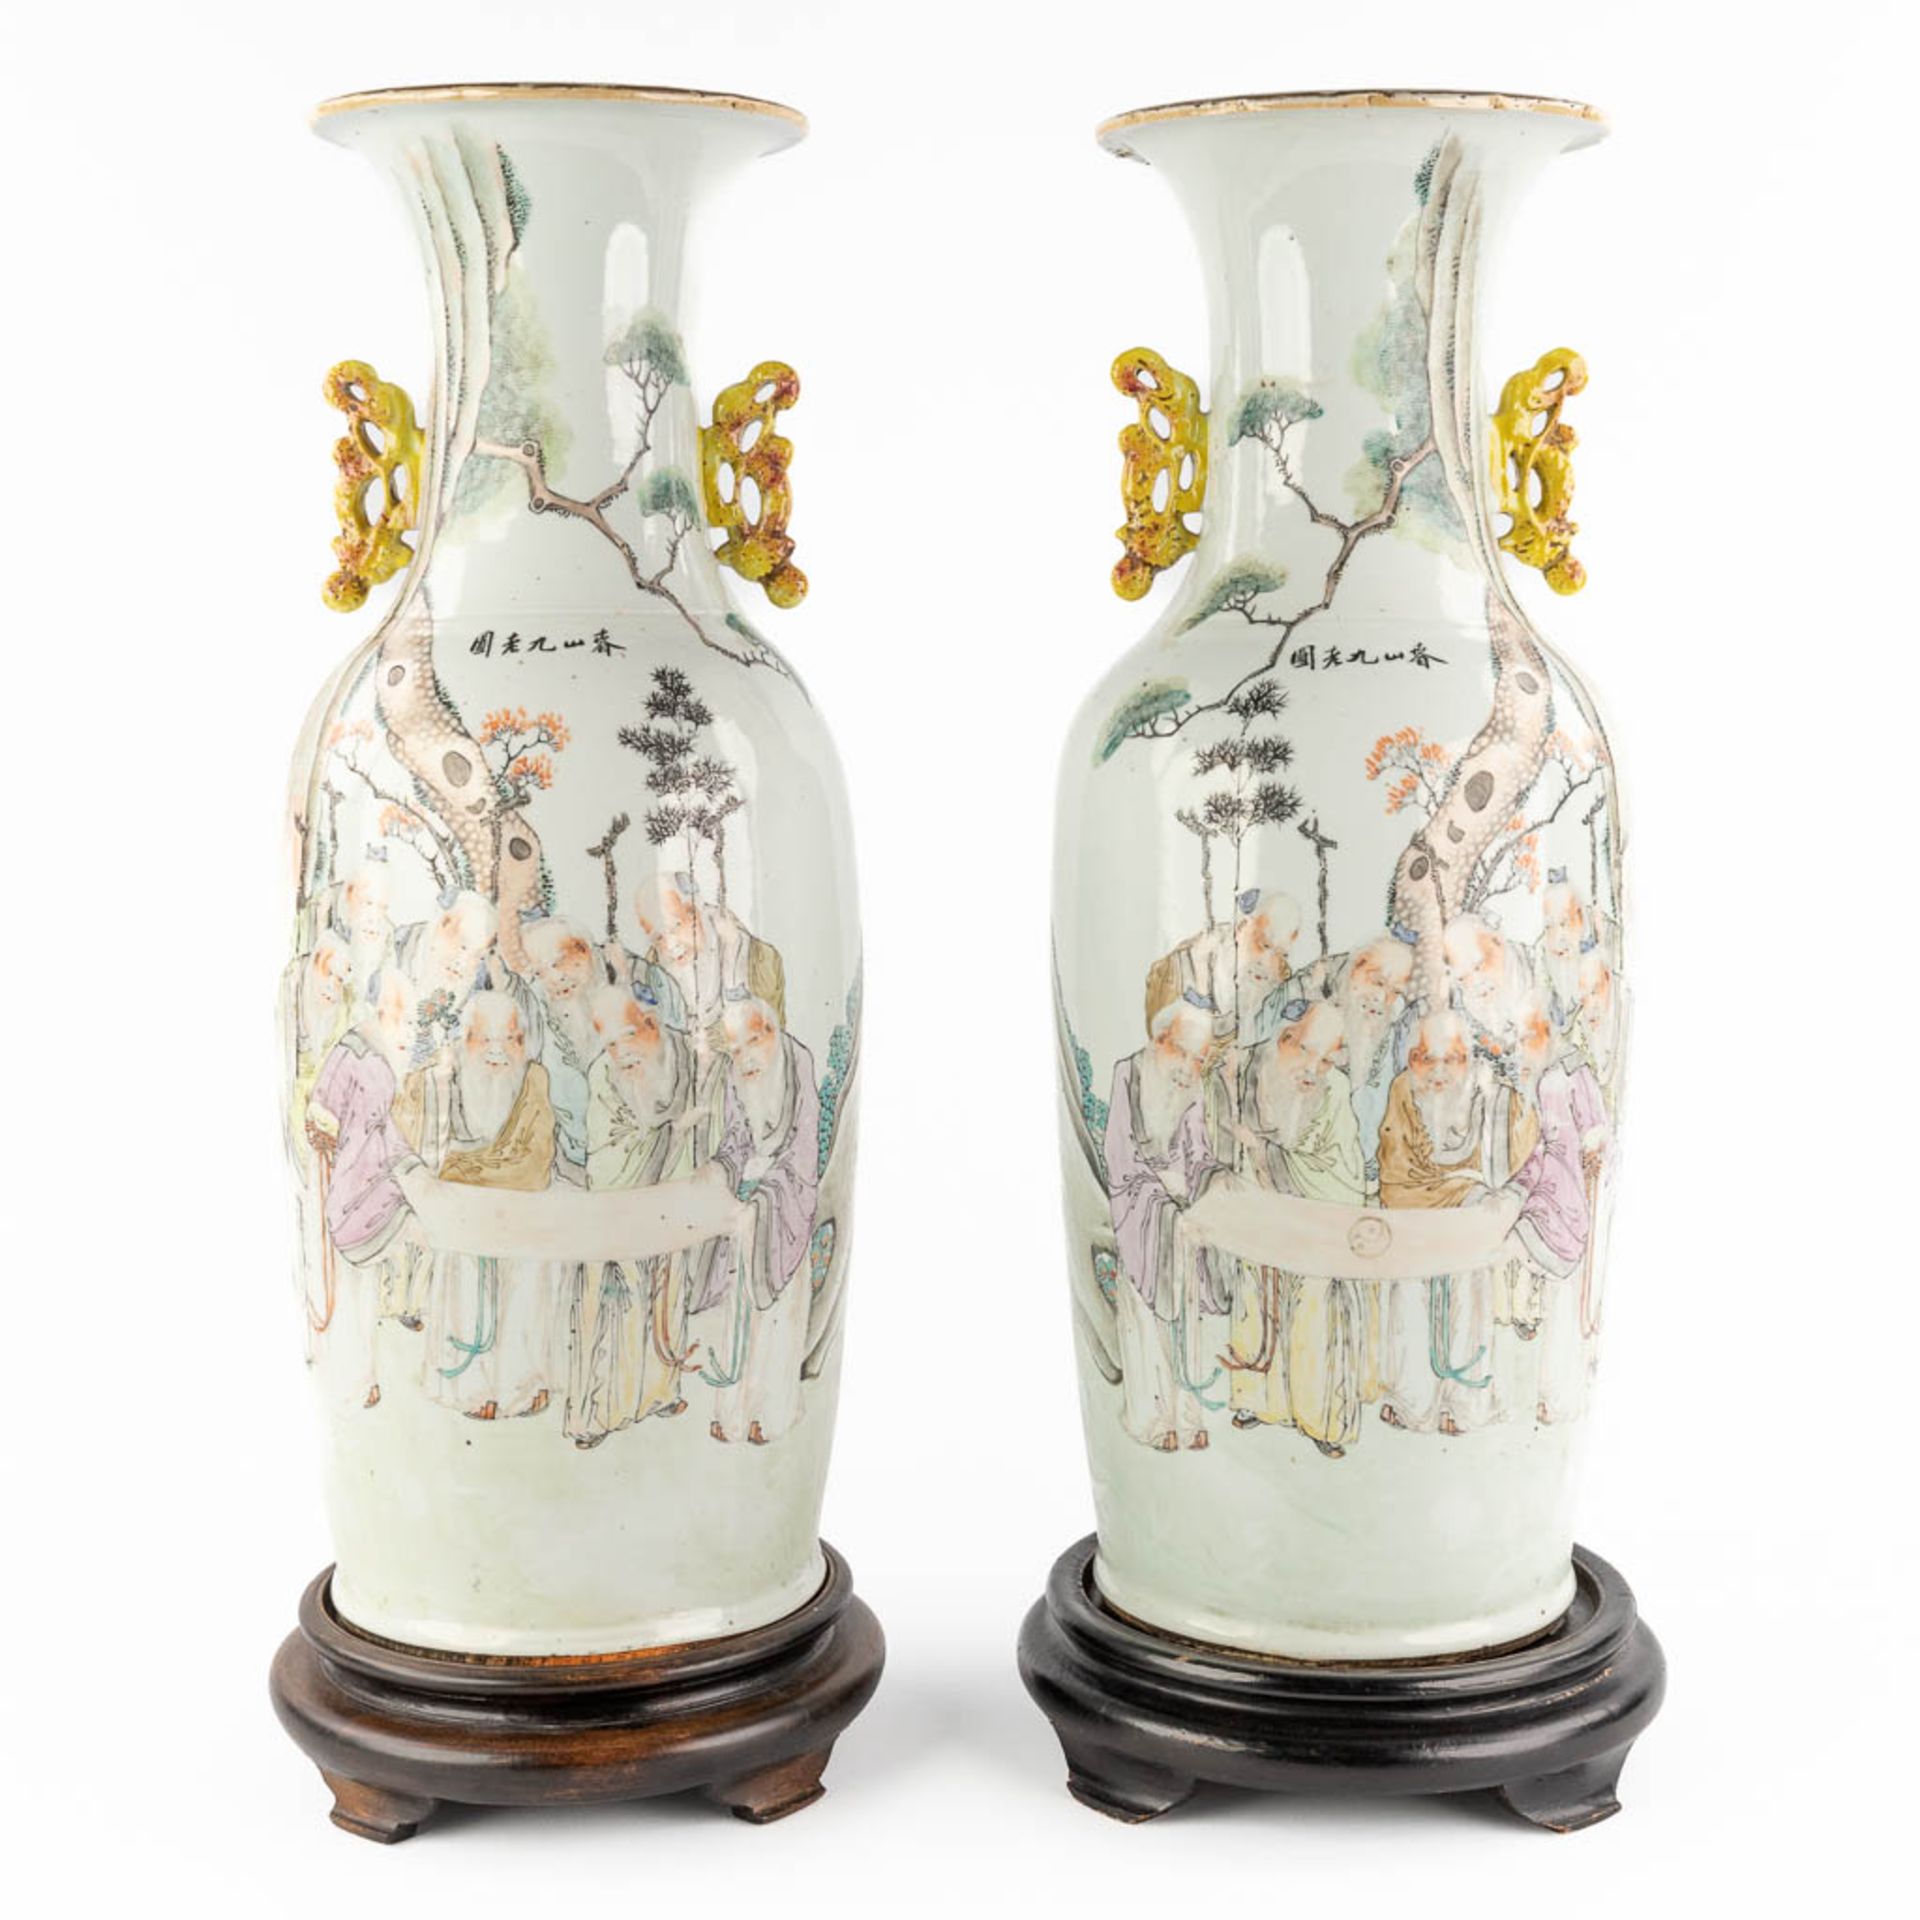 A pair of Chinese vases Qianjian cai, decor of wise men holding a cloth, signed Tu Ziqing. 19th/20th